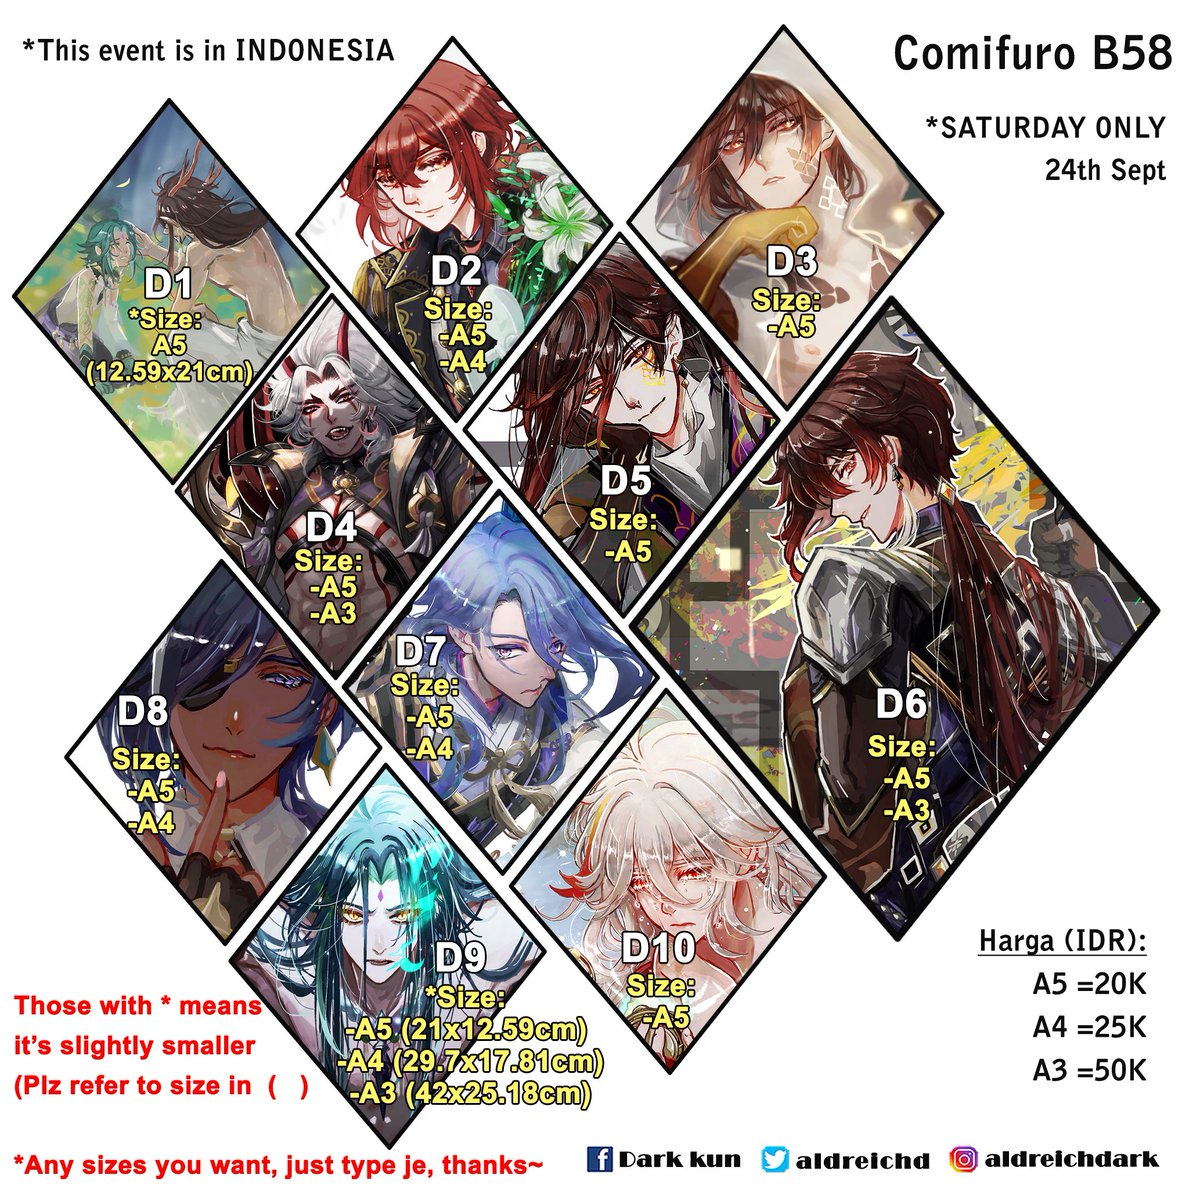 We have decided to open preorders for Comifuro15 for my prints!

BASICALLY;

1) Choose which print u want, what size, what amount. e.g. D7-A5(2), D15-A3(1)

2)Fill in 1) in this Google drive and pay by 11:59pm, Monday, 19th Sept!

https://t.co/GYqJLw6fAZ

#comifuro #comifuro15 